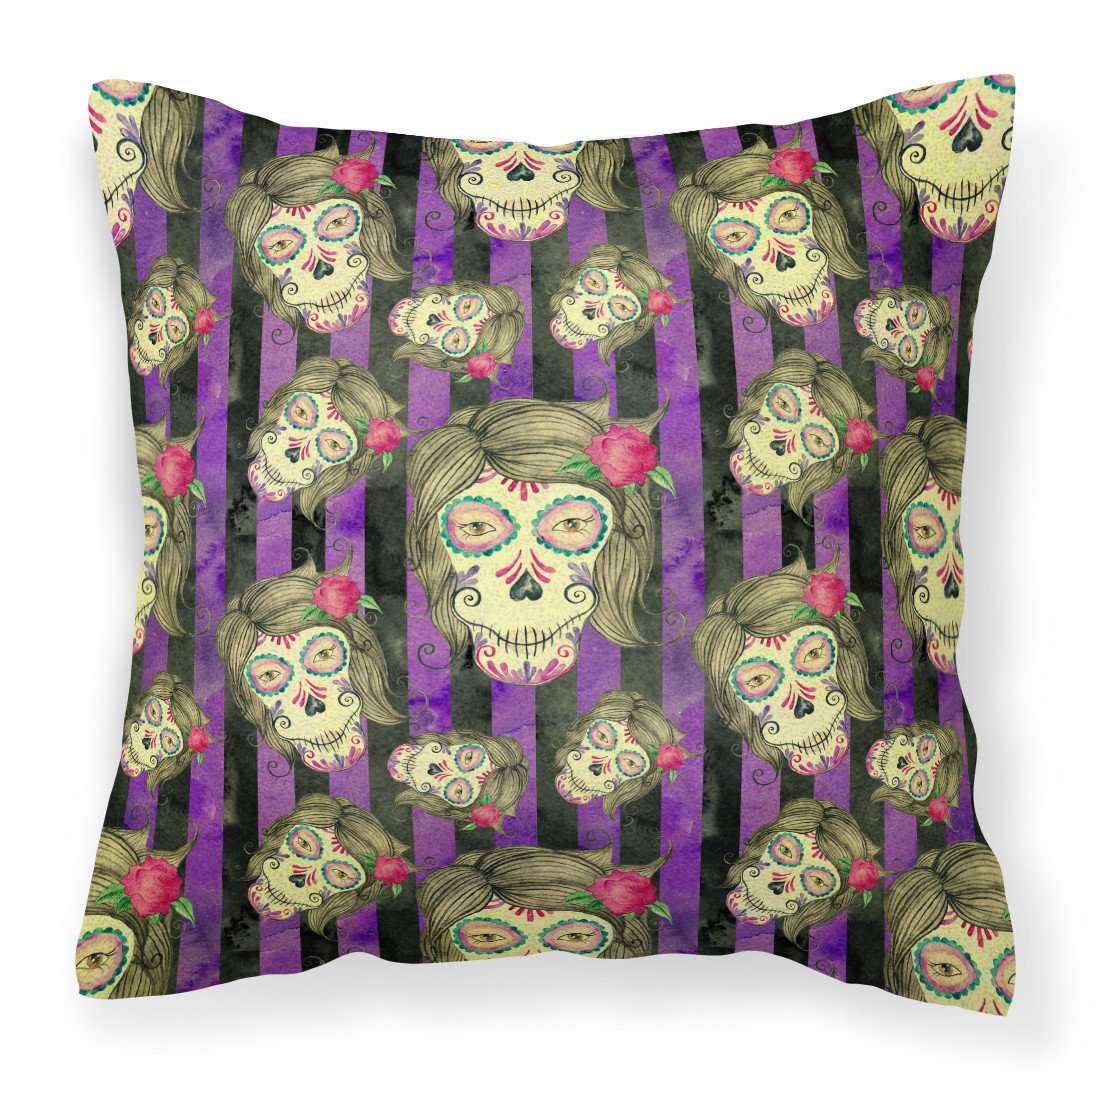 Watecolor Day of the Dead Halloween Fabric Decorative Pillow BB7519PW1818 by Caroline's Treasures